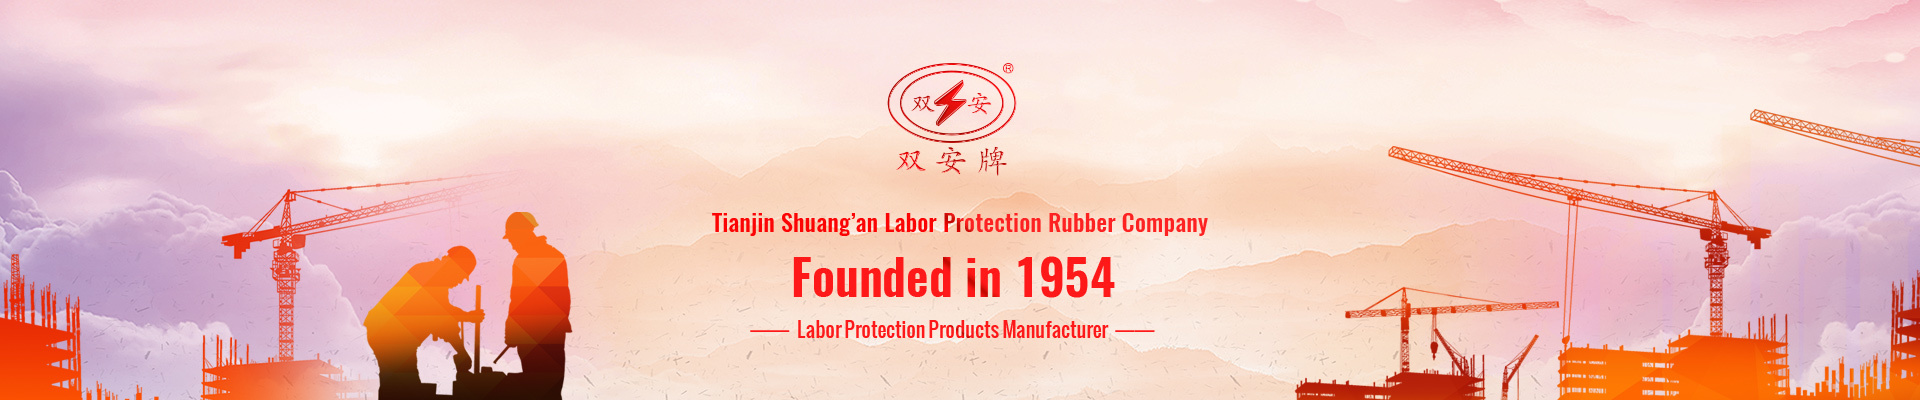 Tianjin Shuang’an Labor Protection Rubber Company